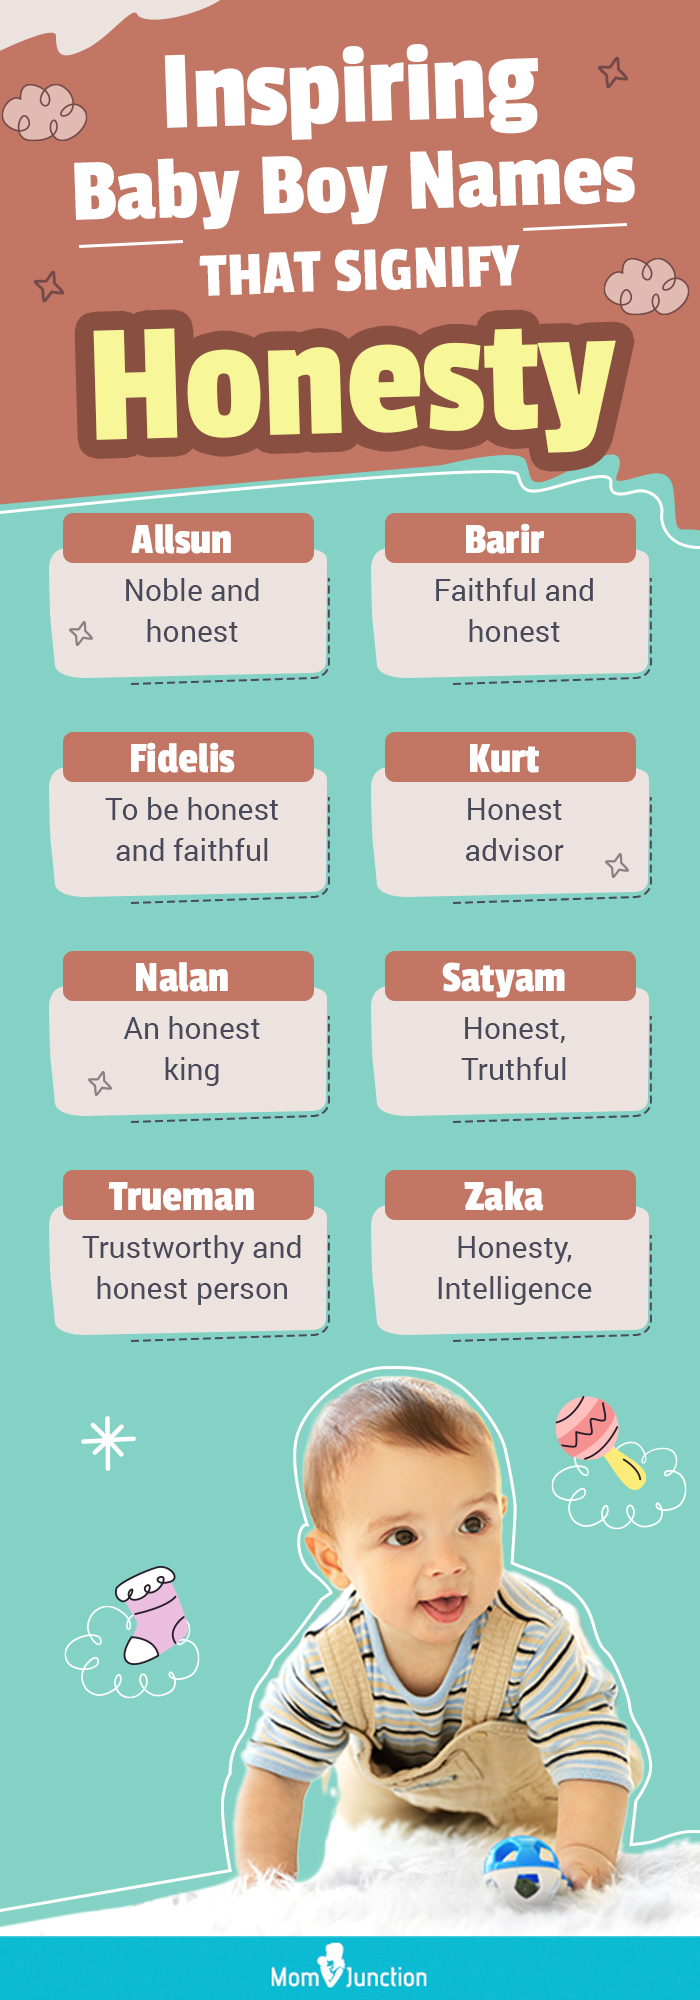 inspiring baby boy names that signify honesty (infographic)